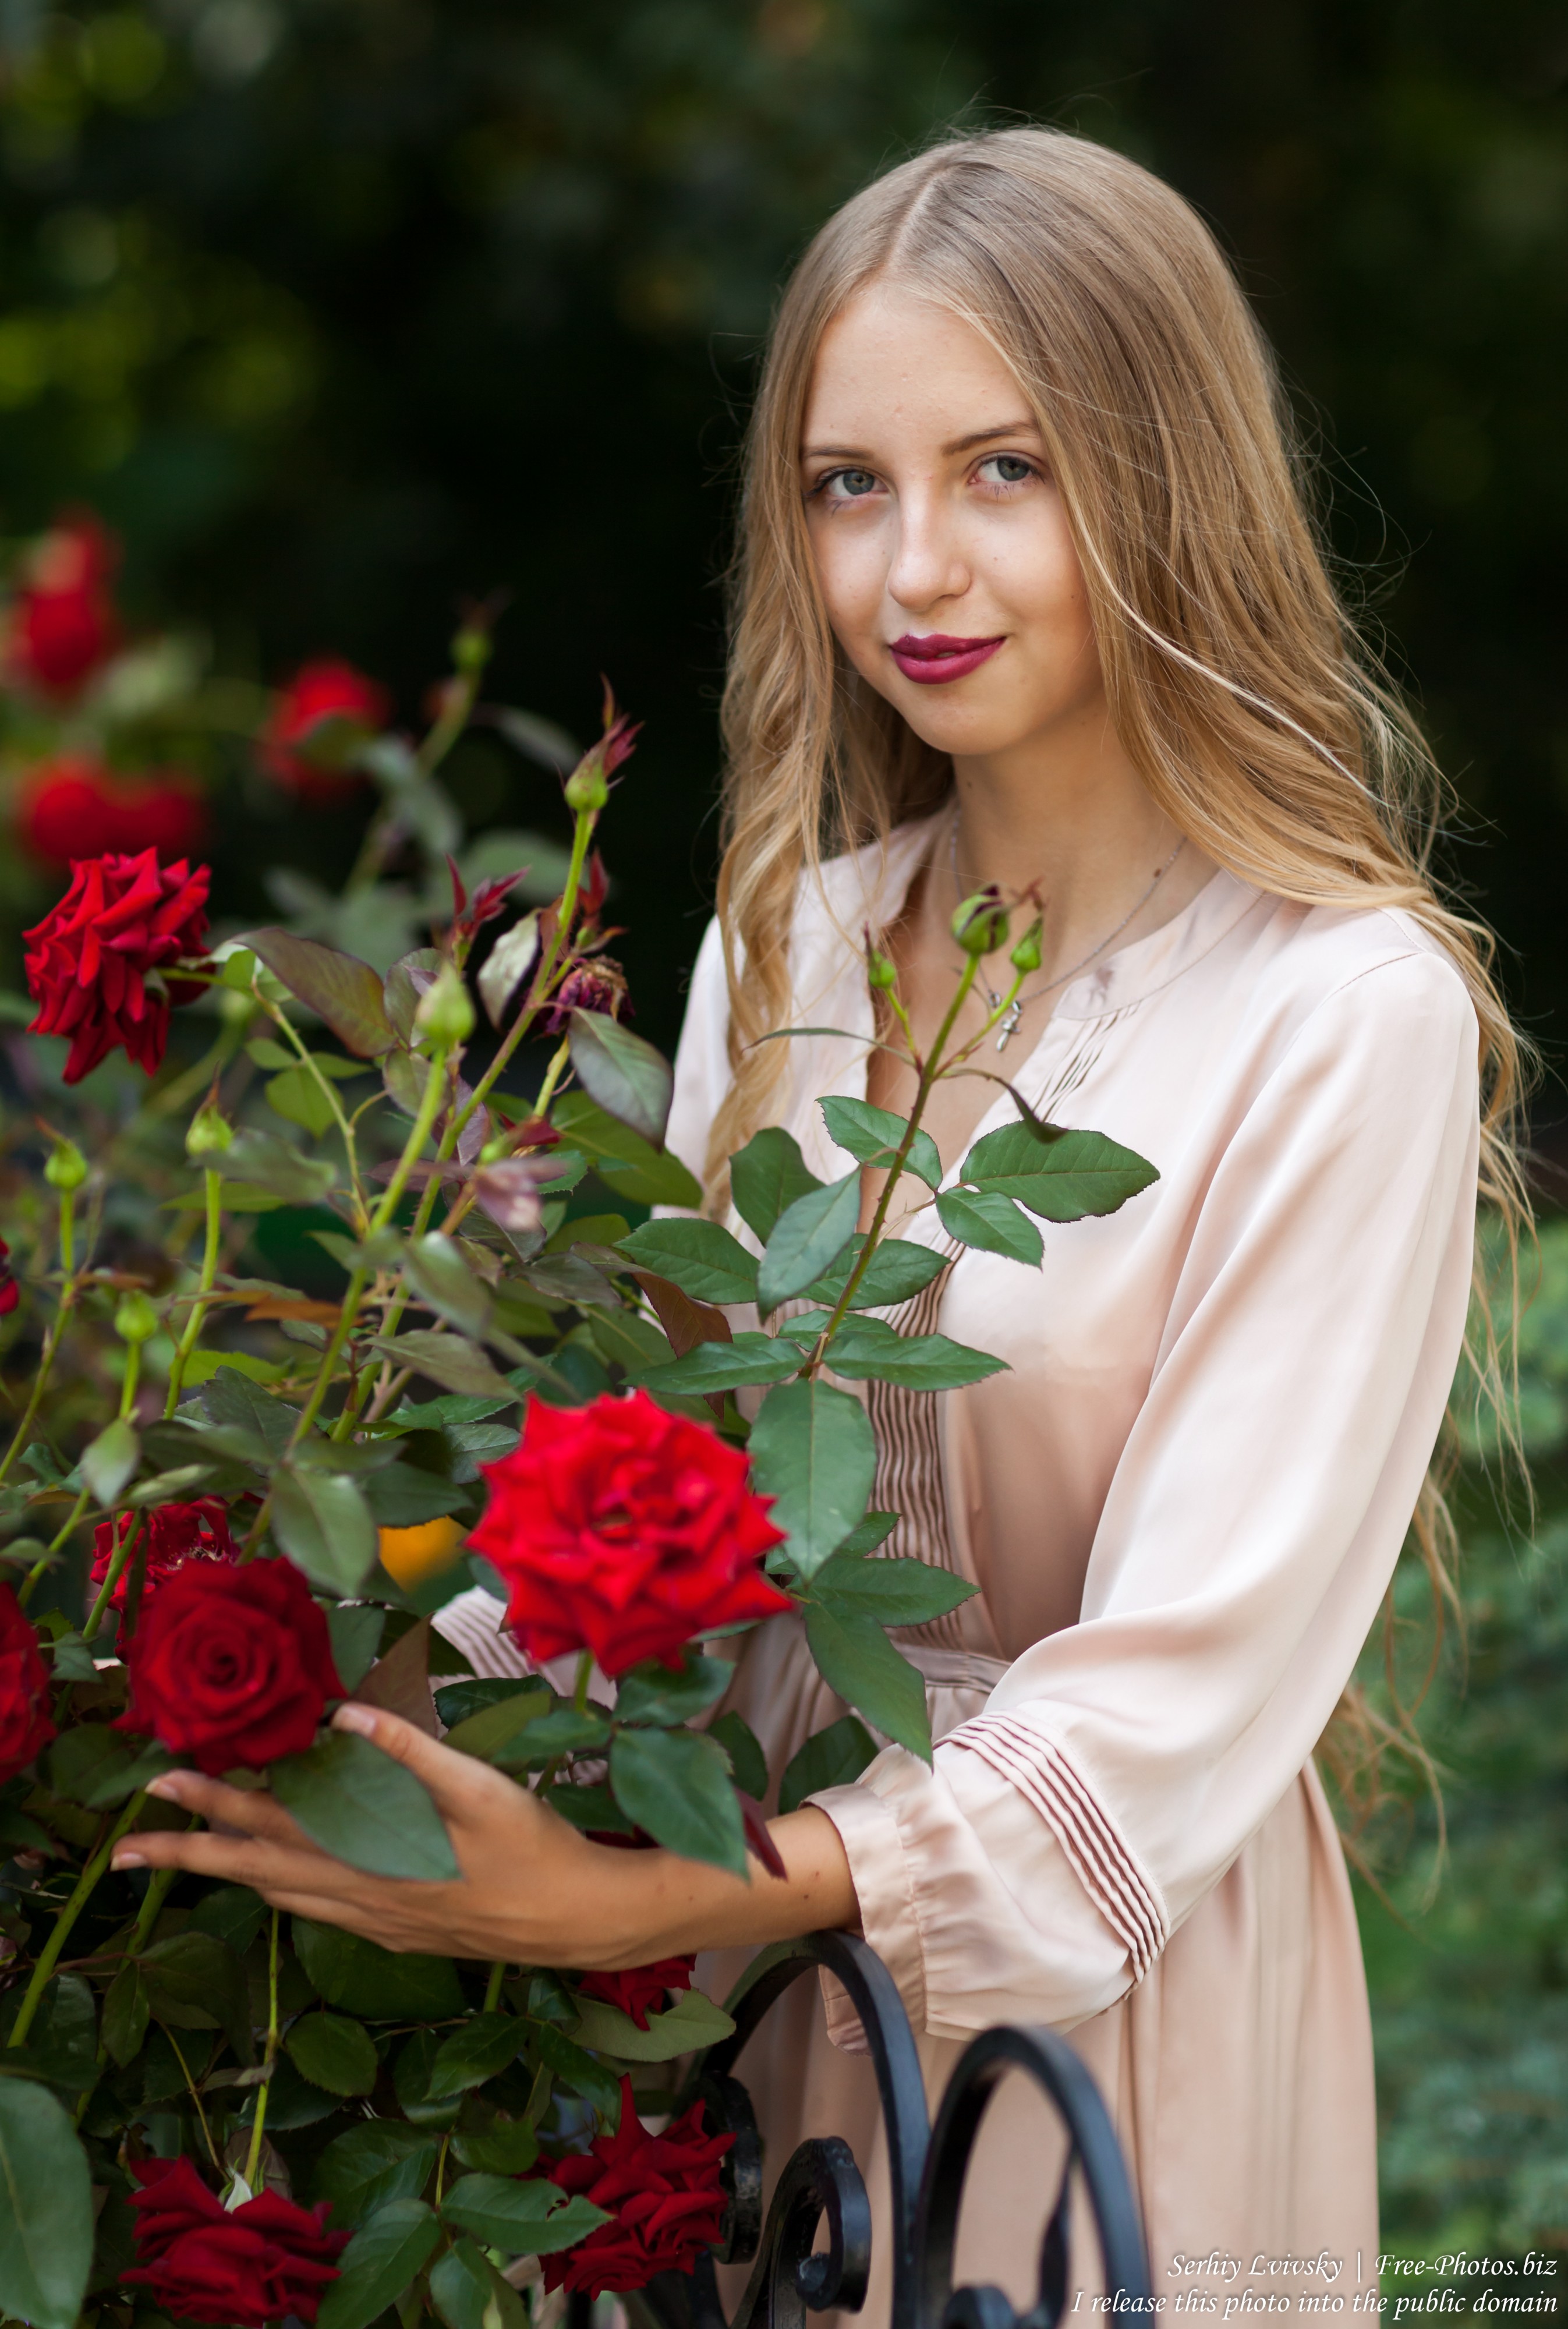 Ania - a 14-year-old natural blonde girl photographed by Serhiy Lvivsky in August 2017, picture 36